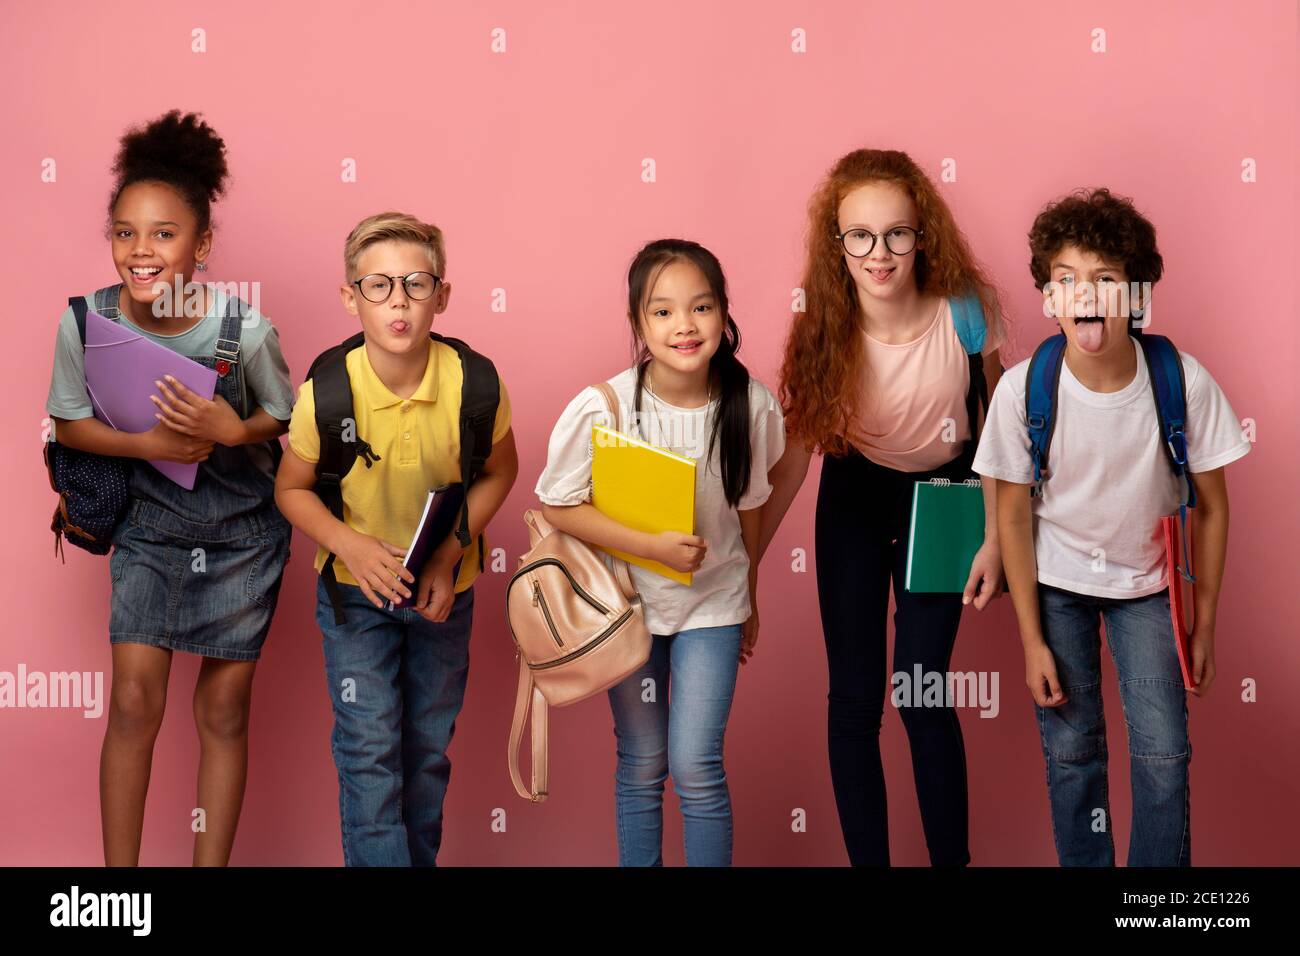 Silly multiethnic kids with school supplies making funny faces on pink background Stock Photo